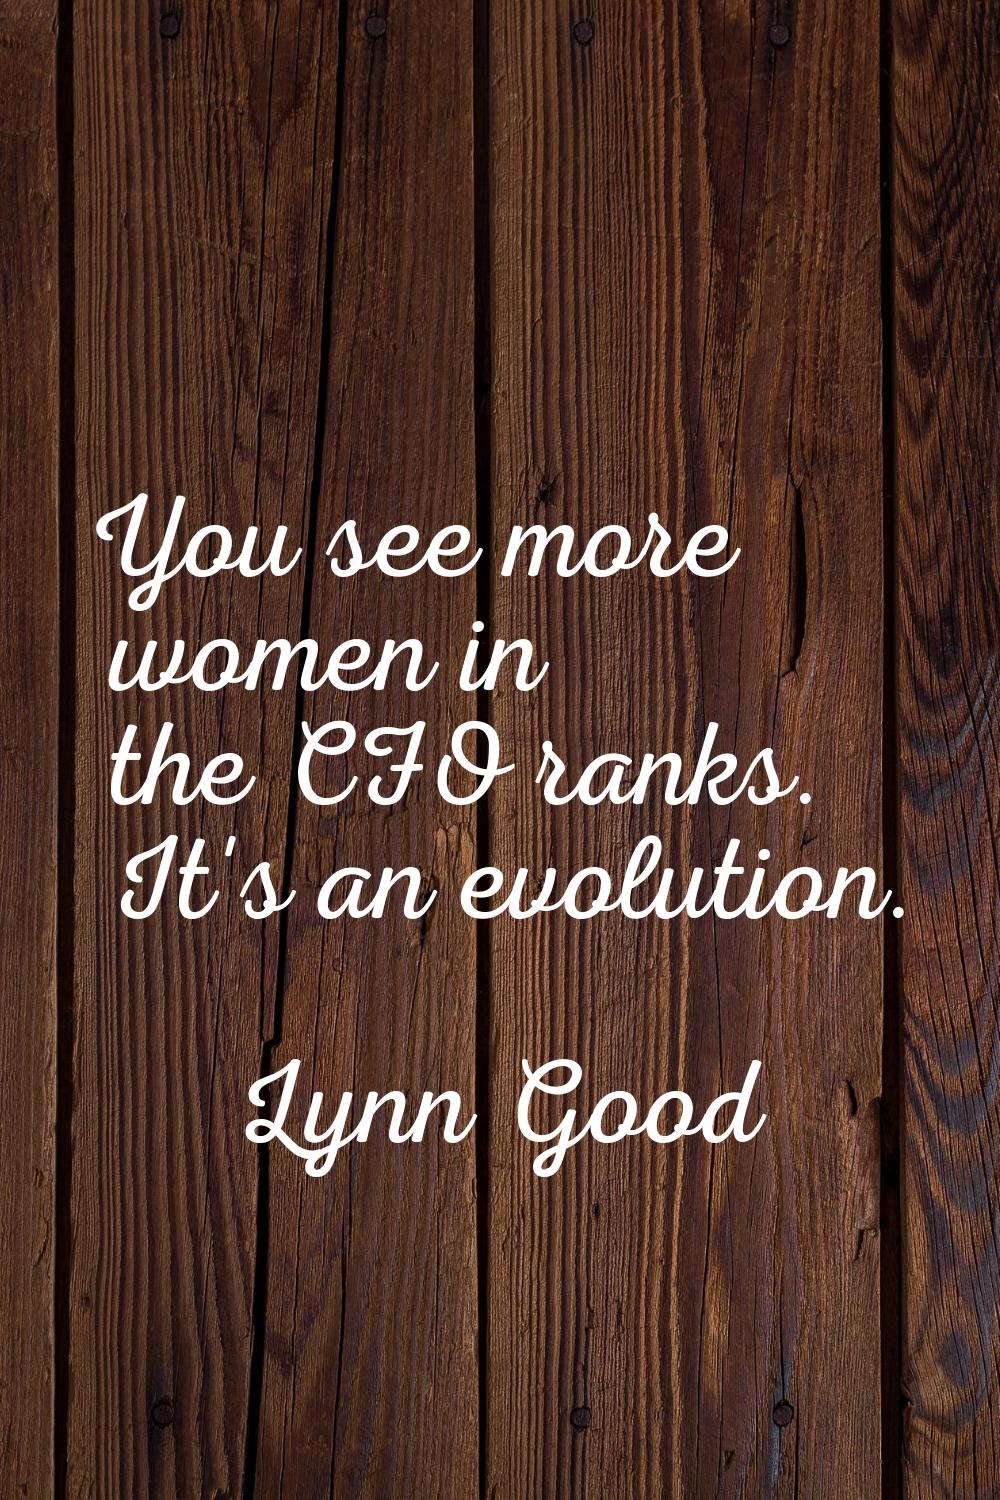 You see more women in the CFO ranks. It's an evolution.